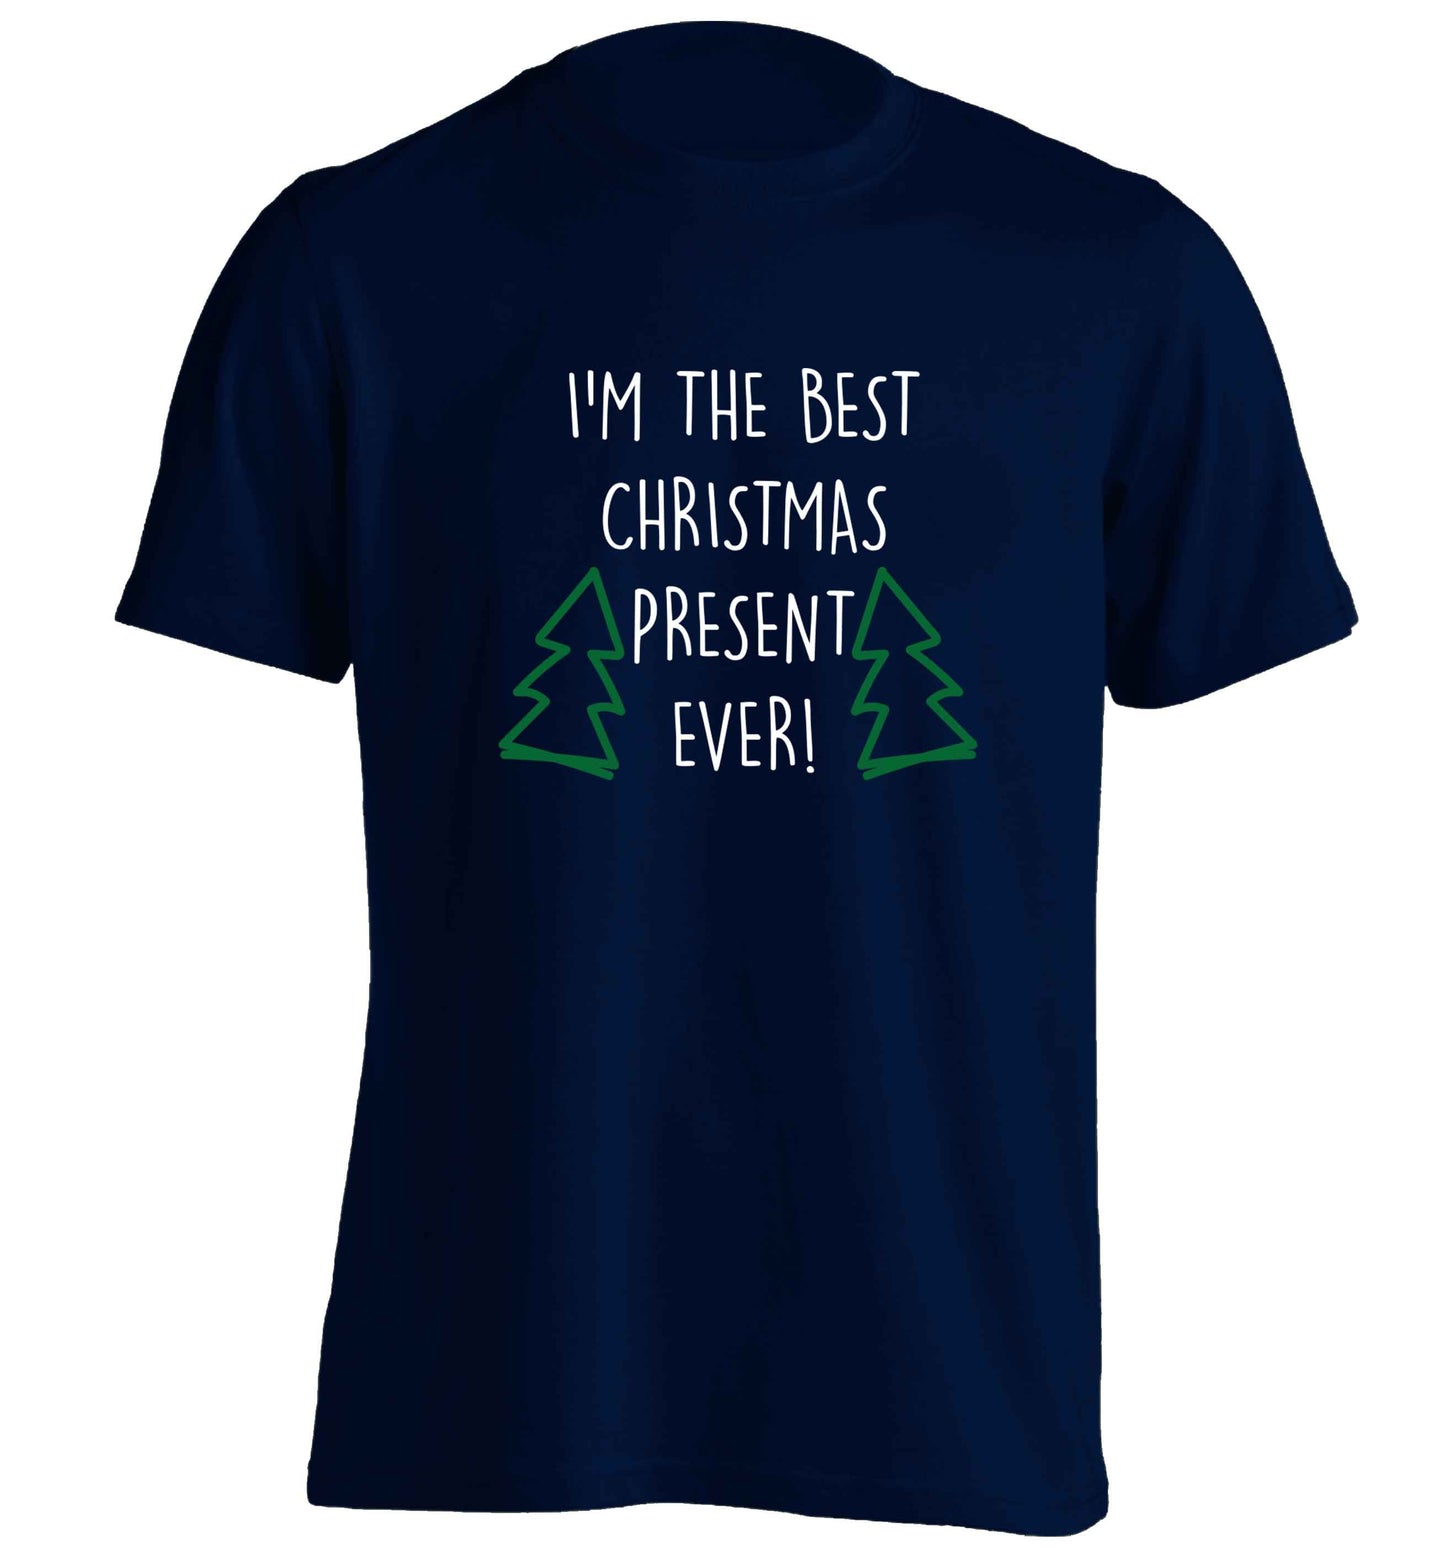 I'm the best Christmas present ever adults unisex navy Tshirt 2XL